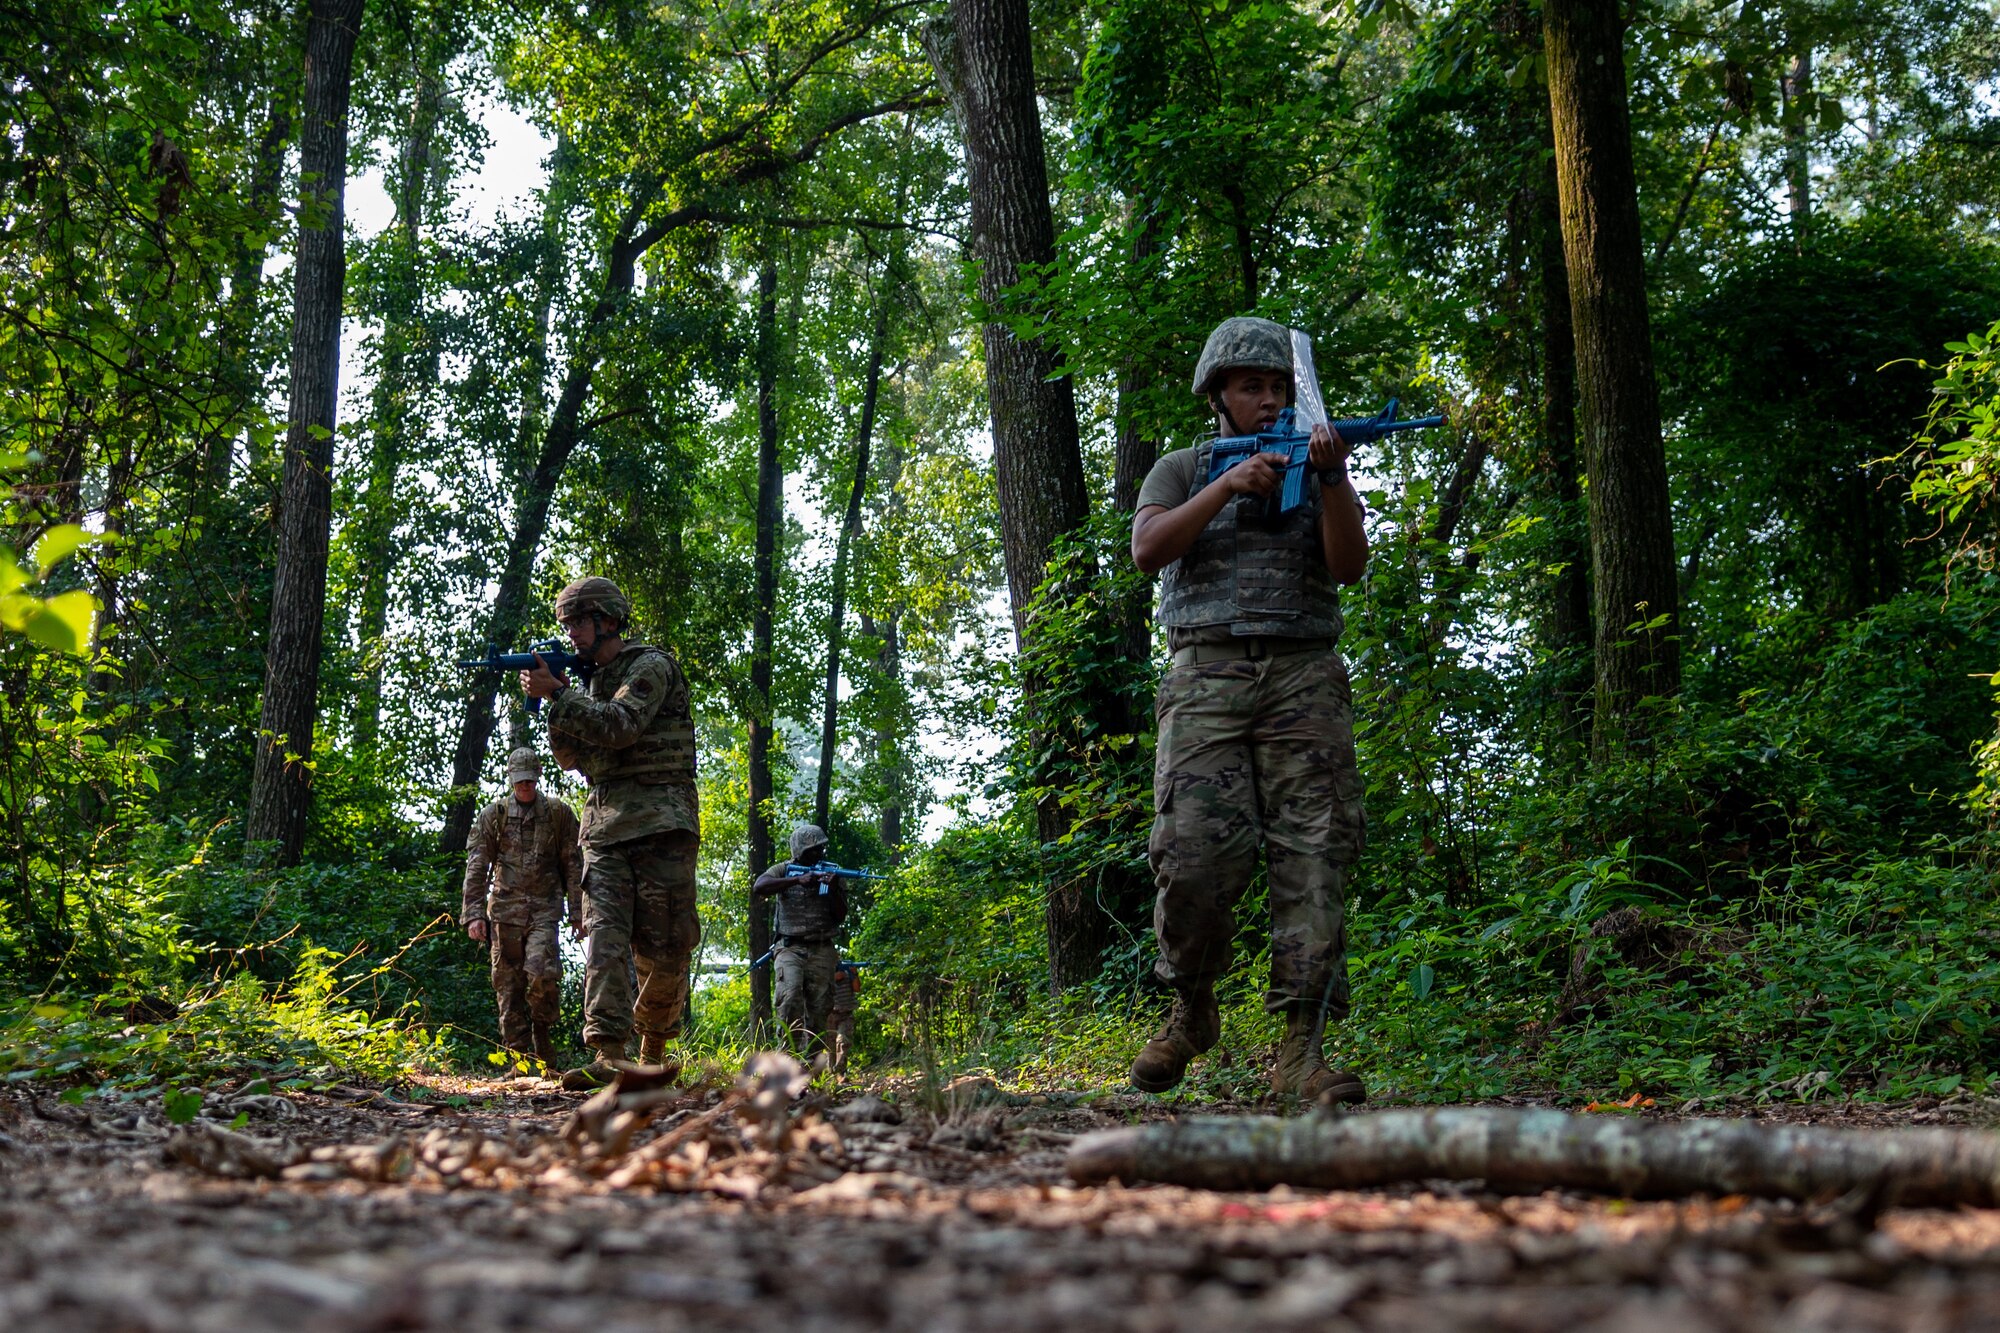 Airmen from the 4th Civil Engineer Squadron patrol the woods as part of the Prime Base Engineer Emergency Force, or Prime BEEF, program at Seymour Johnson Air Force Base, North Carolina, July 22, 2021. The Prime BEEF program gives Airmen a chance to complete all their required training in a three-day period. (U.S. Air Force photo by Airman 1st Class David Lynn)